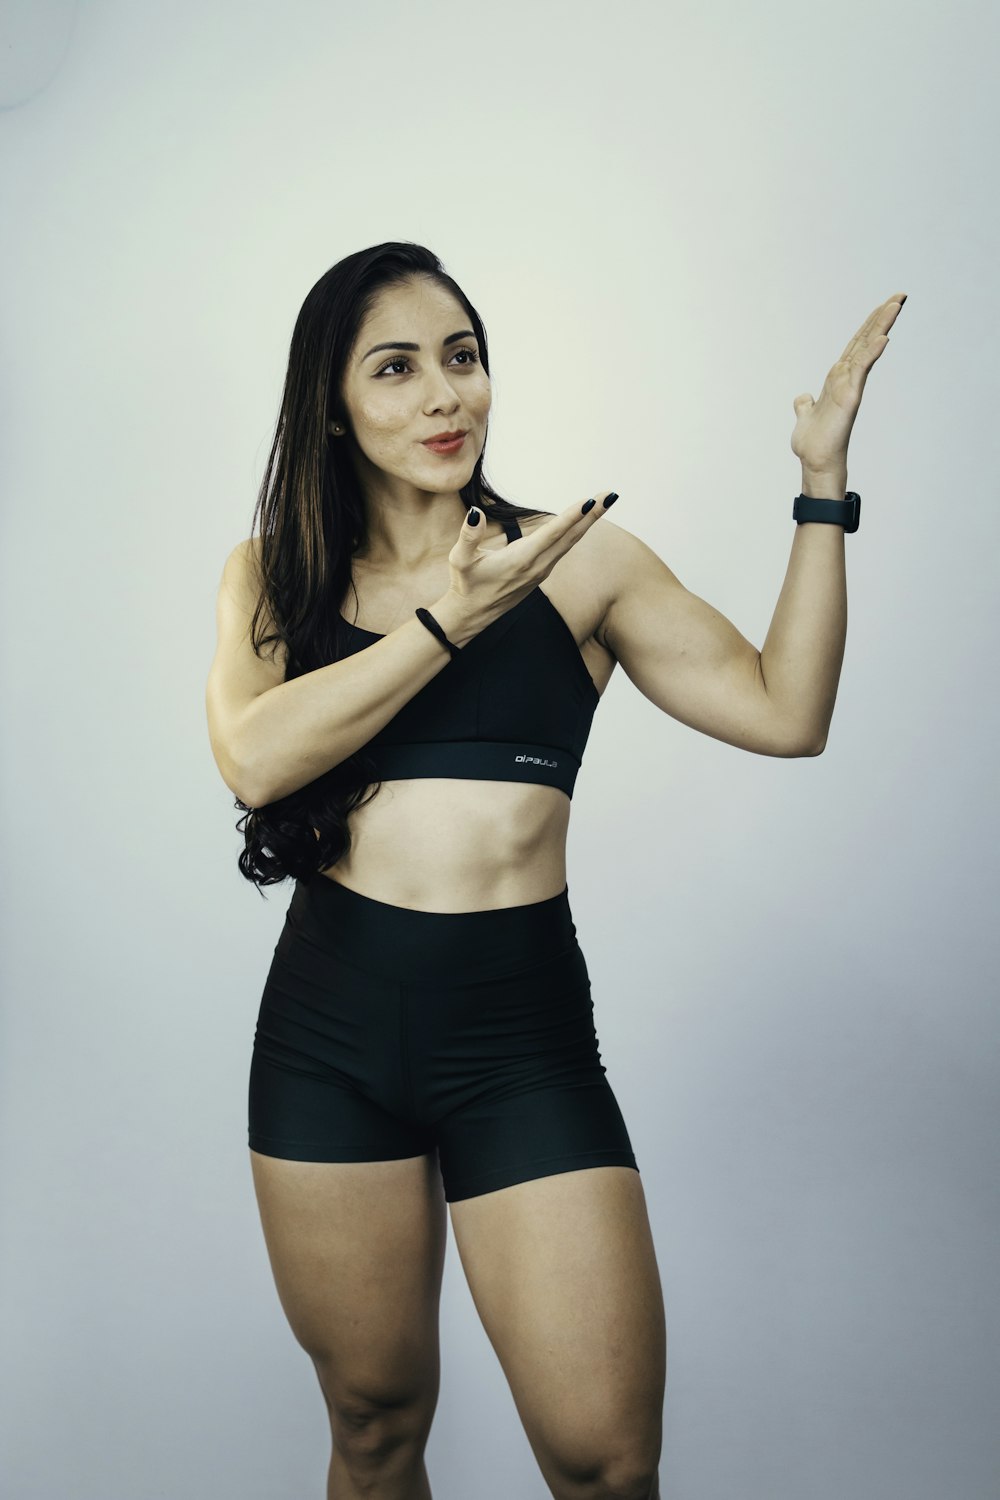 a woman in a black top and black shorts